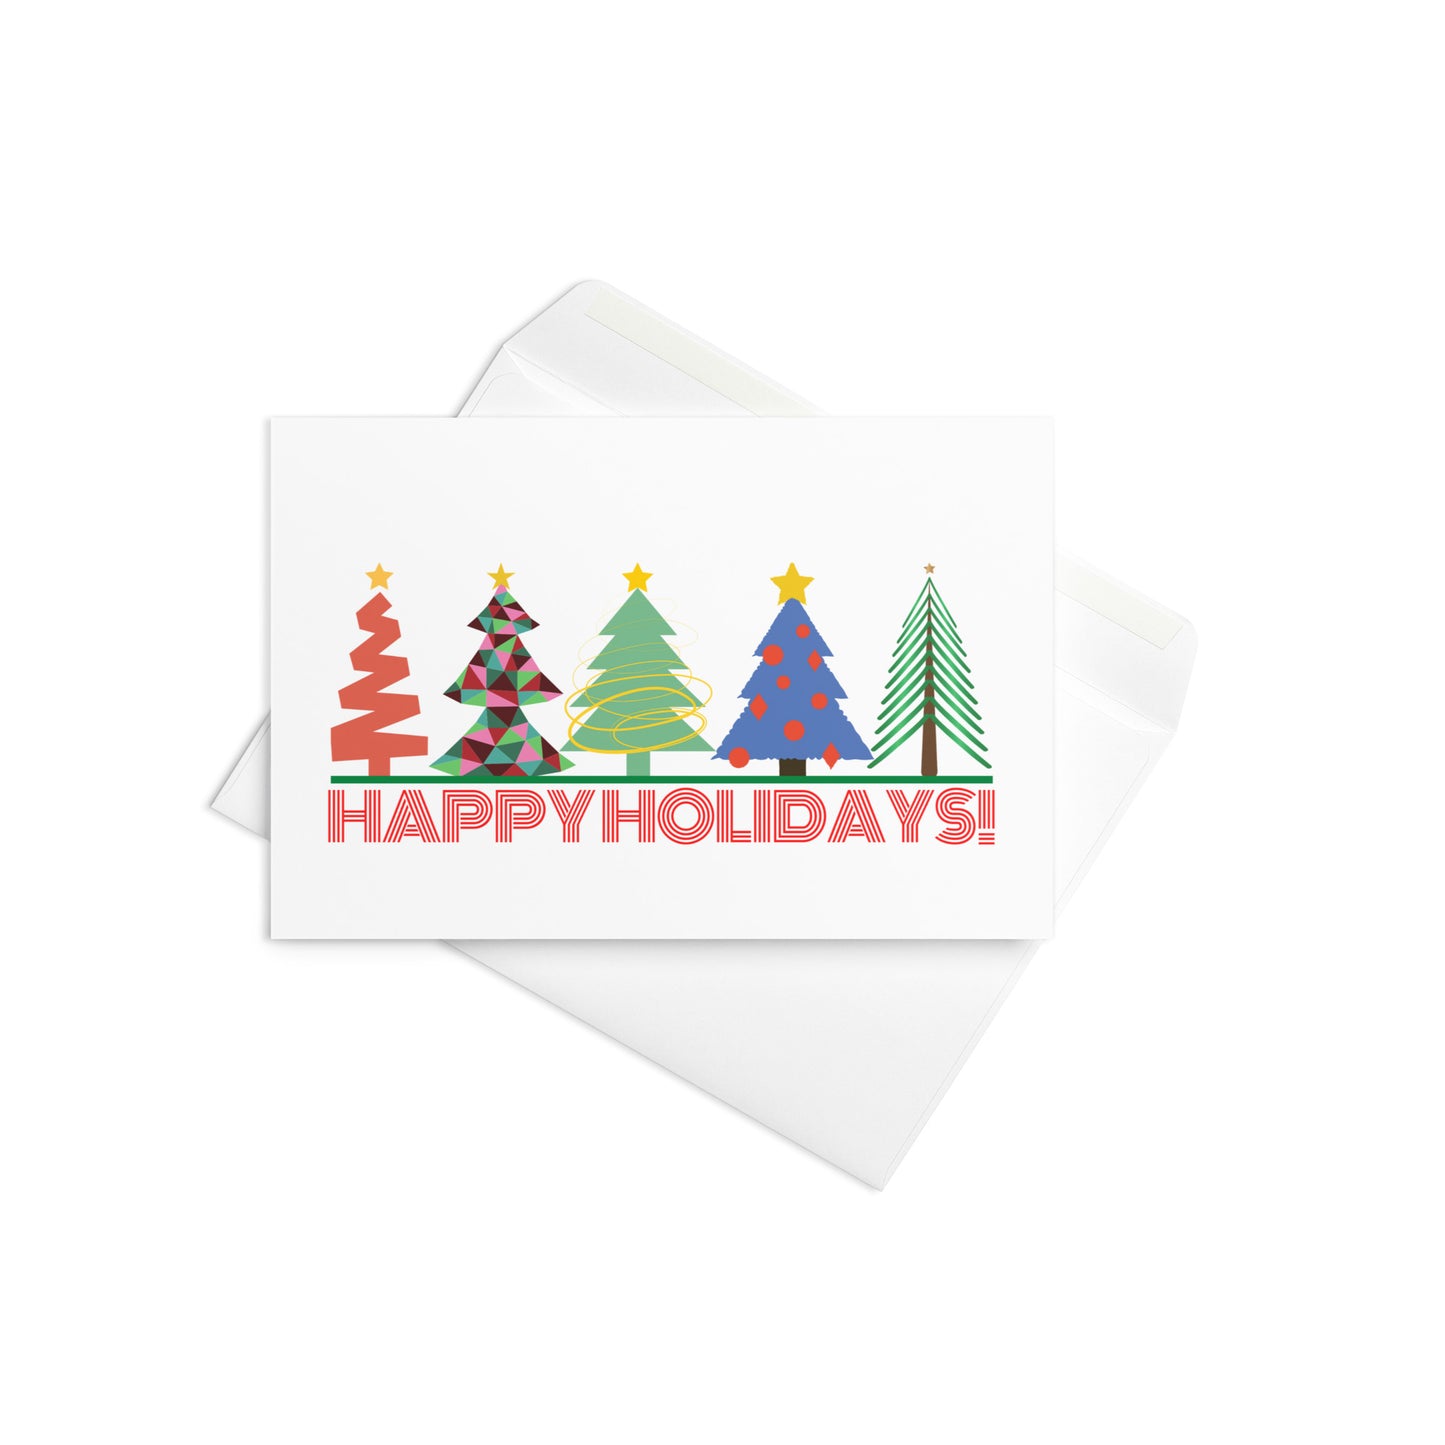 Happy Holiday's Greeting cards- Set of 10 Blank Greeting Cards and Envelopes